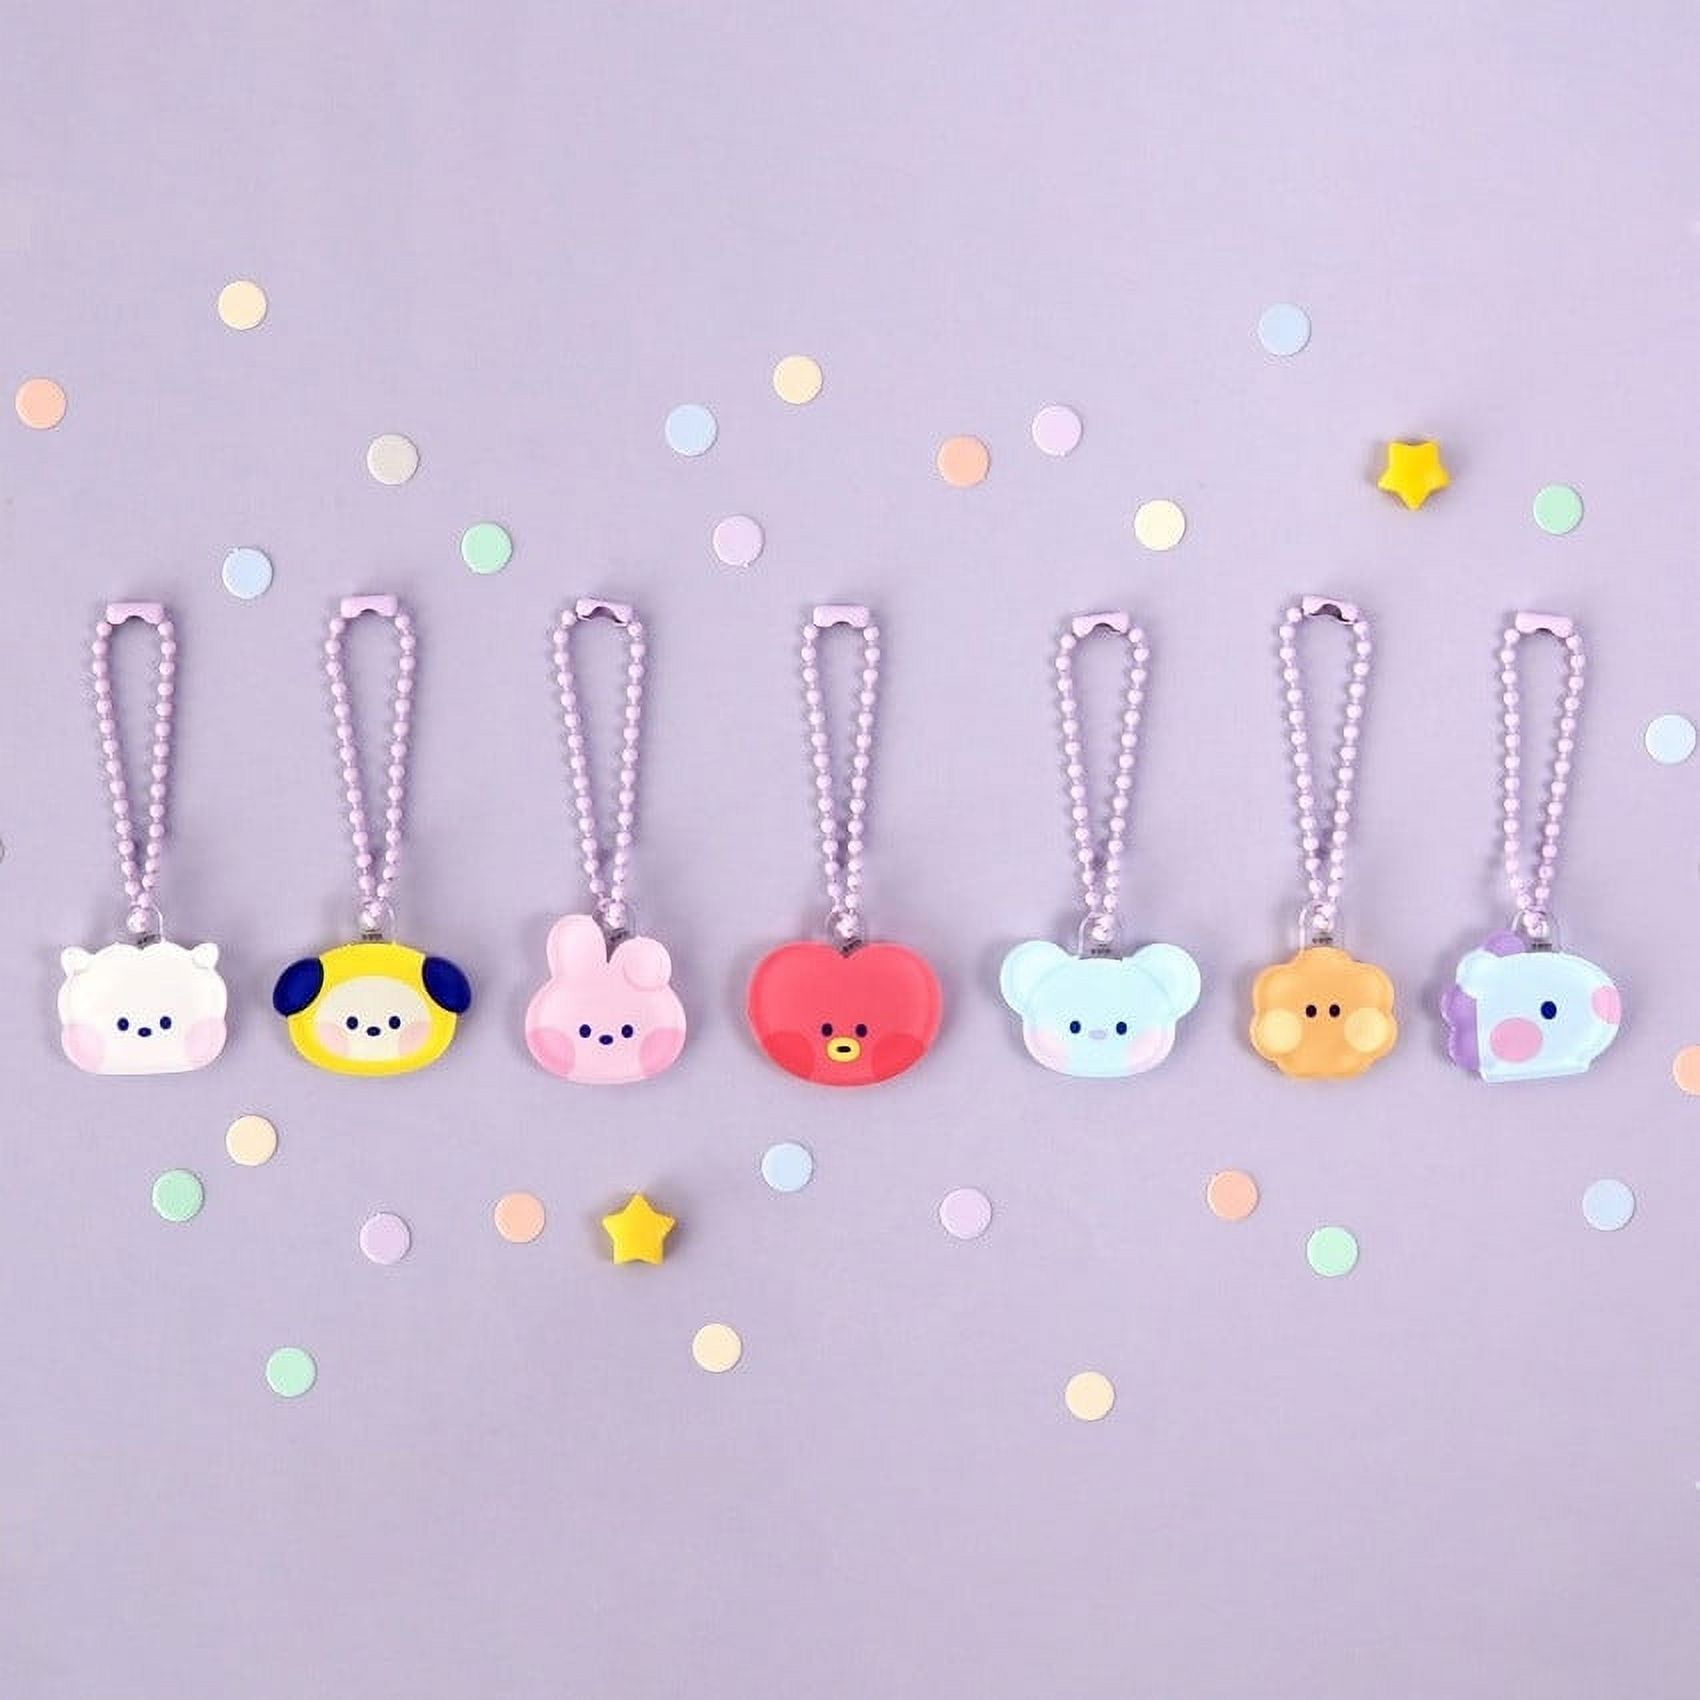 BT21 minini NECK COOLING TUBE BLUE – LINE FRIENDS COLLECTION STORE